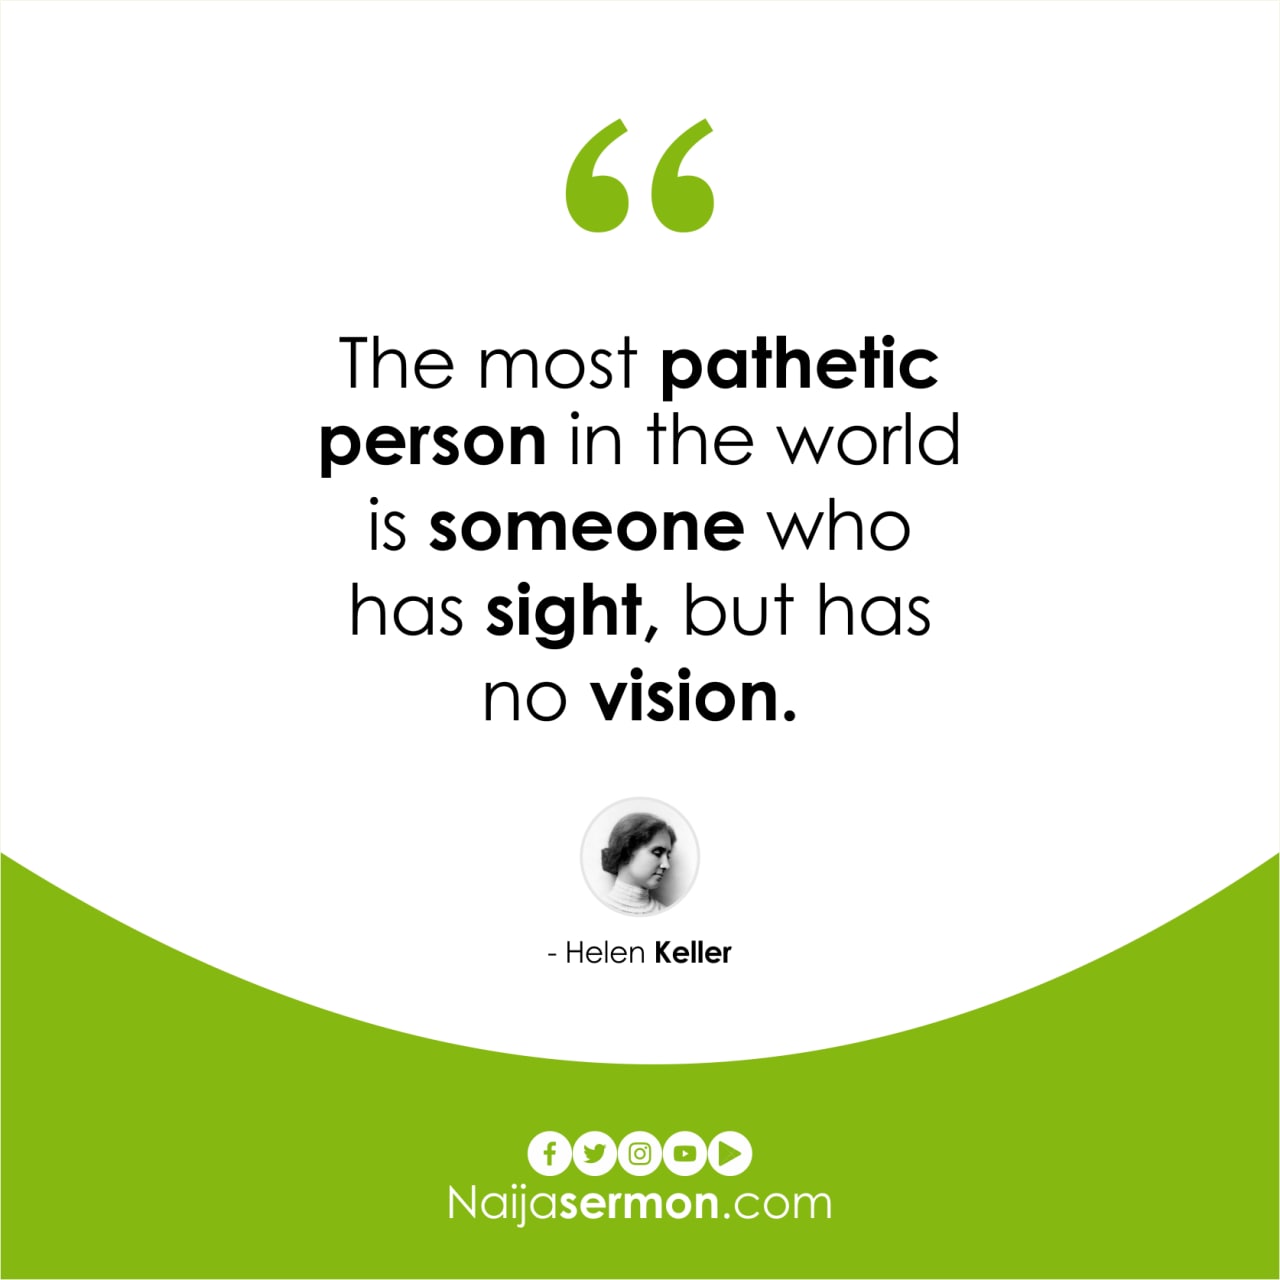 QUOTE OF THE DAY BY HELEN KELLER 19